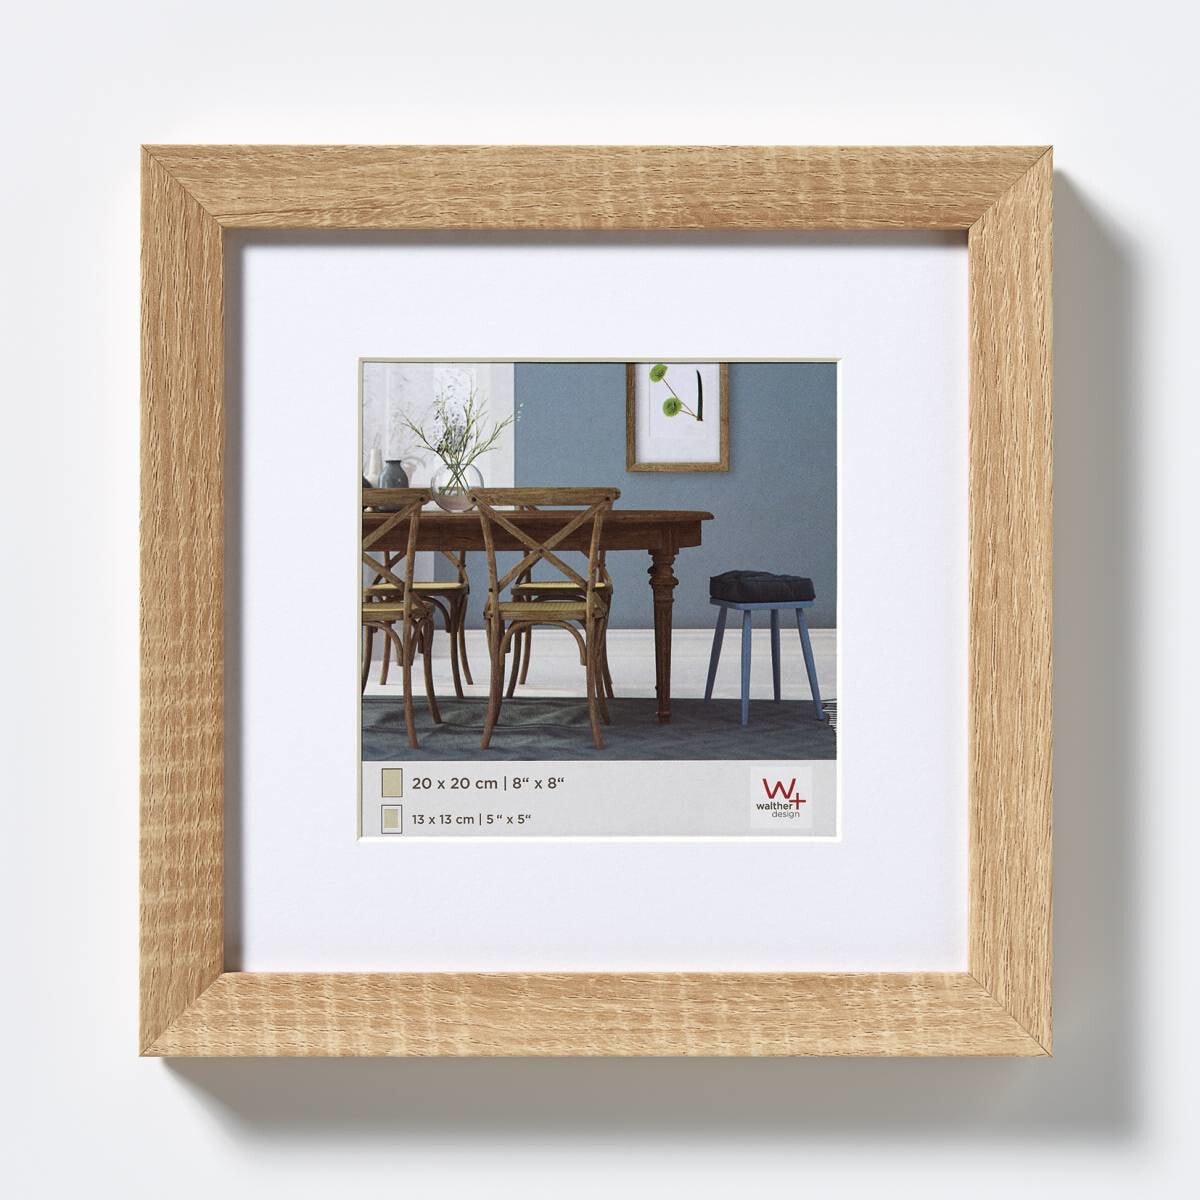 Walther EF330E - MDF - Oak - Single picture frame - Wall - 18 x 18 cm - Square